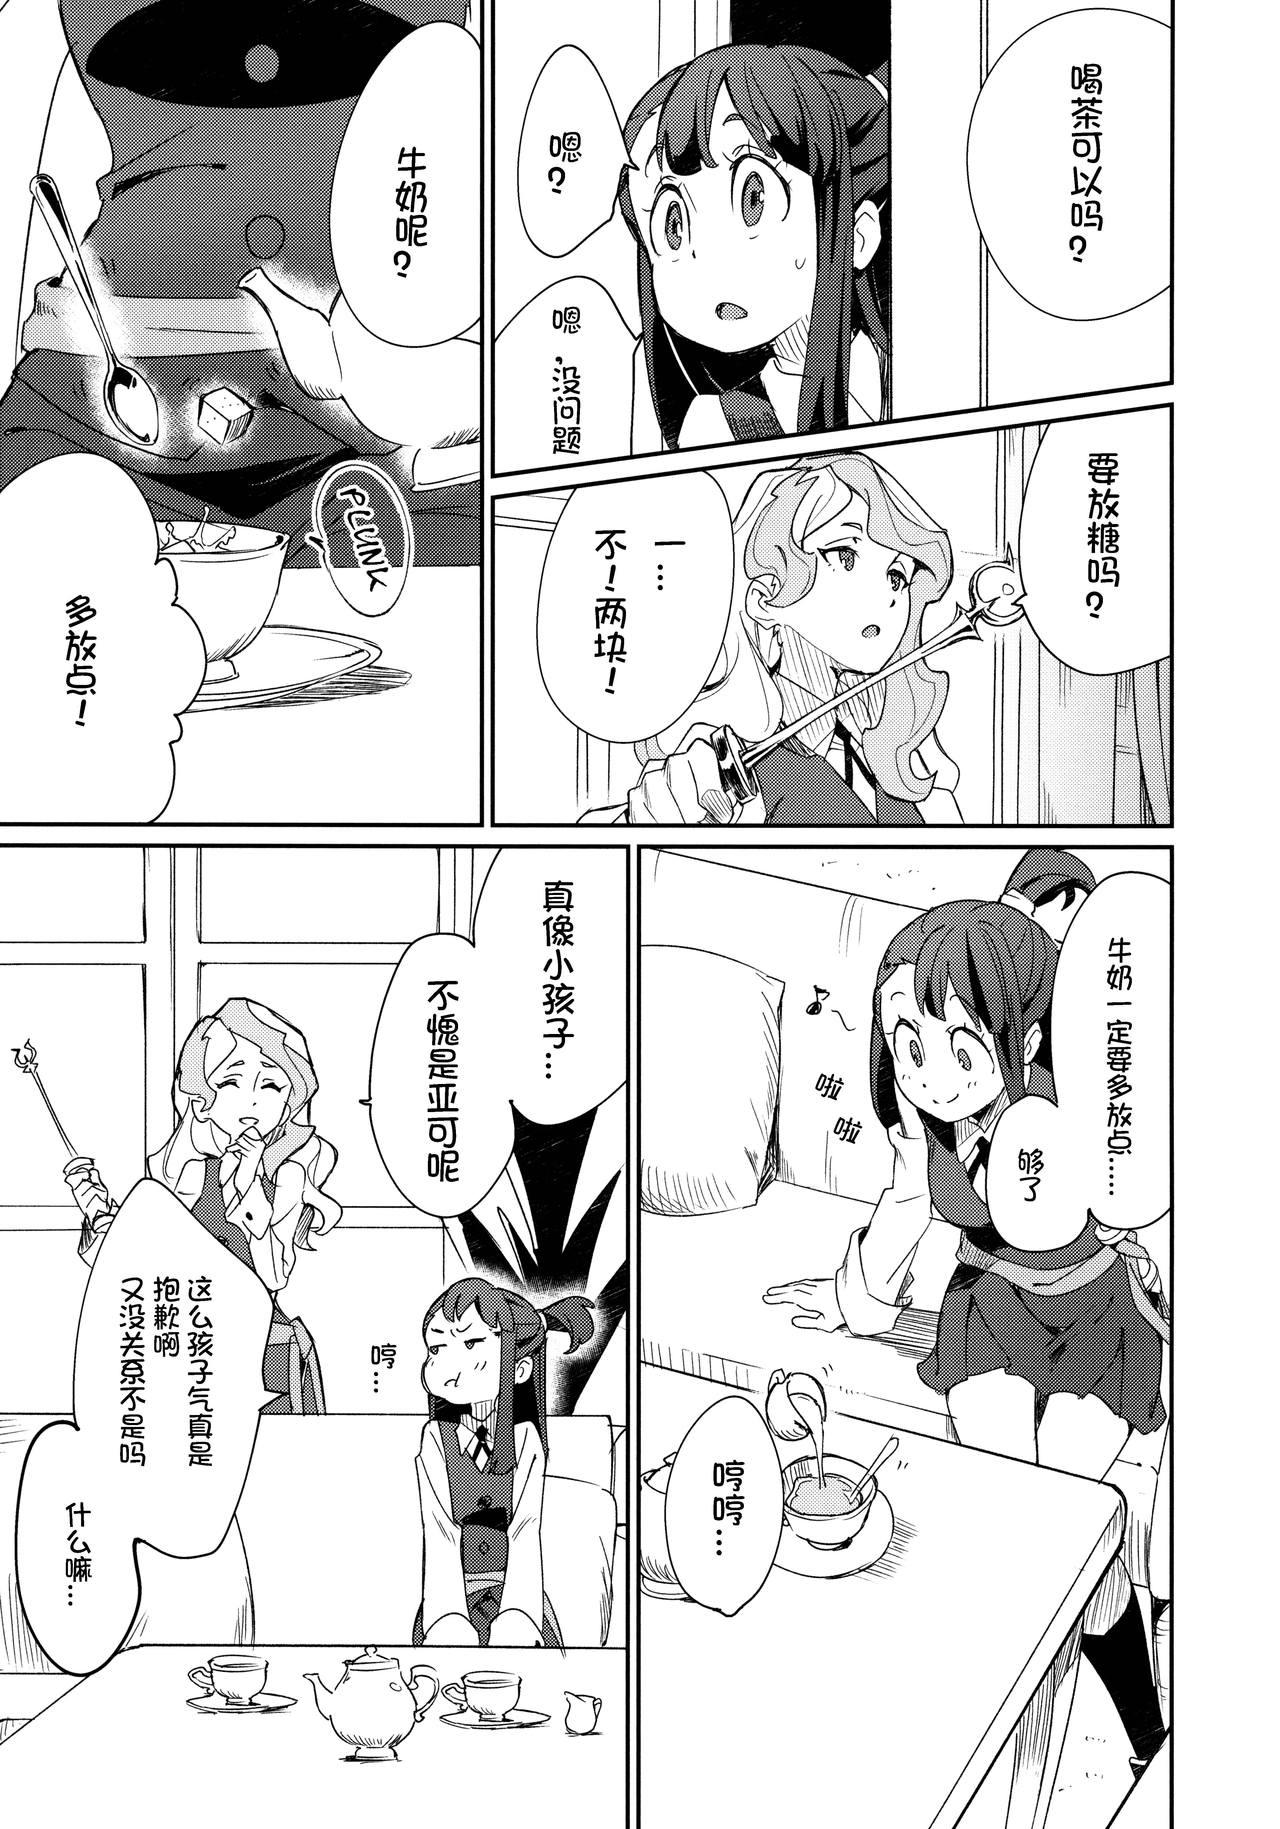 Gaygroup xxx - Little witch academia Nylons - Page 8